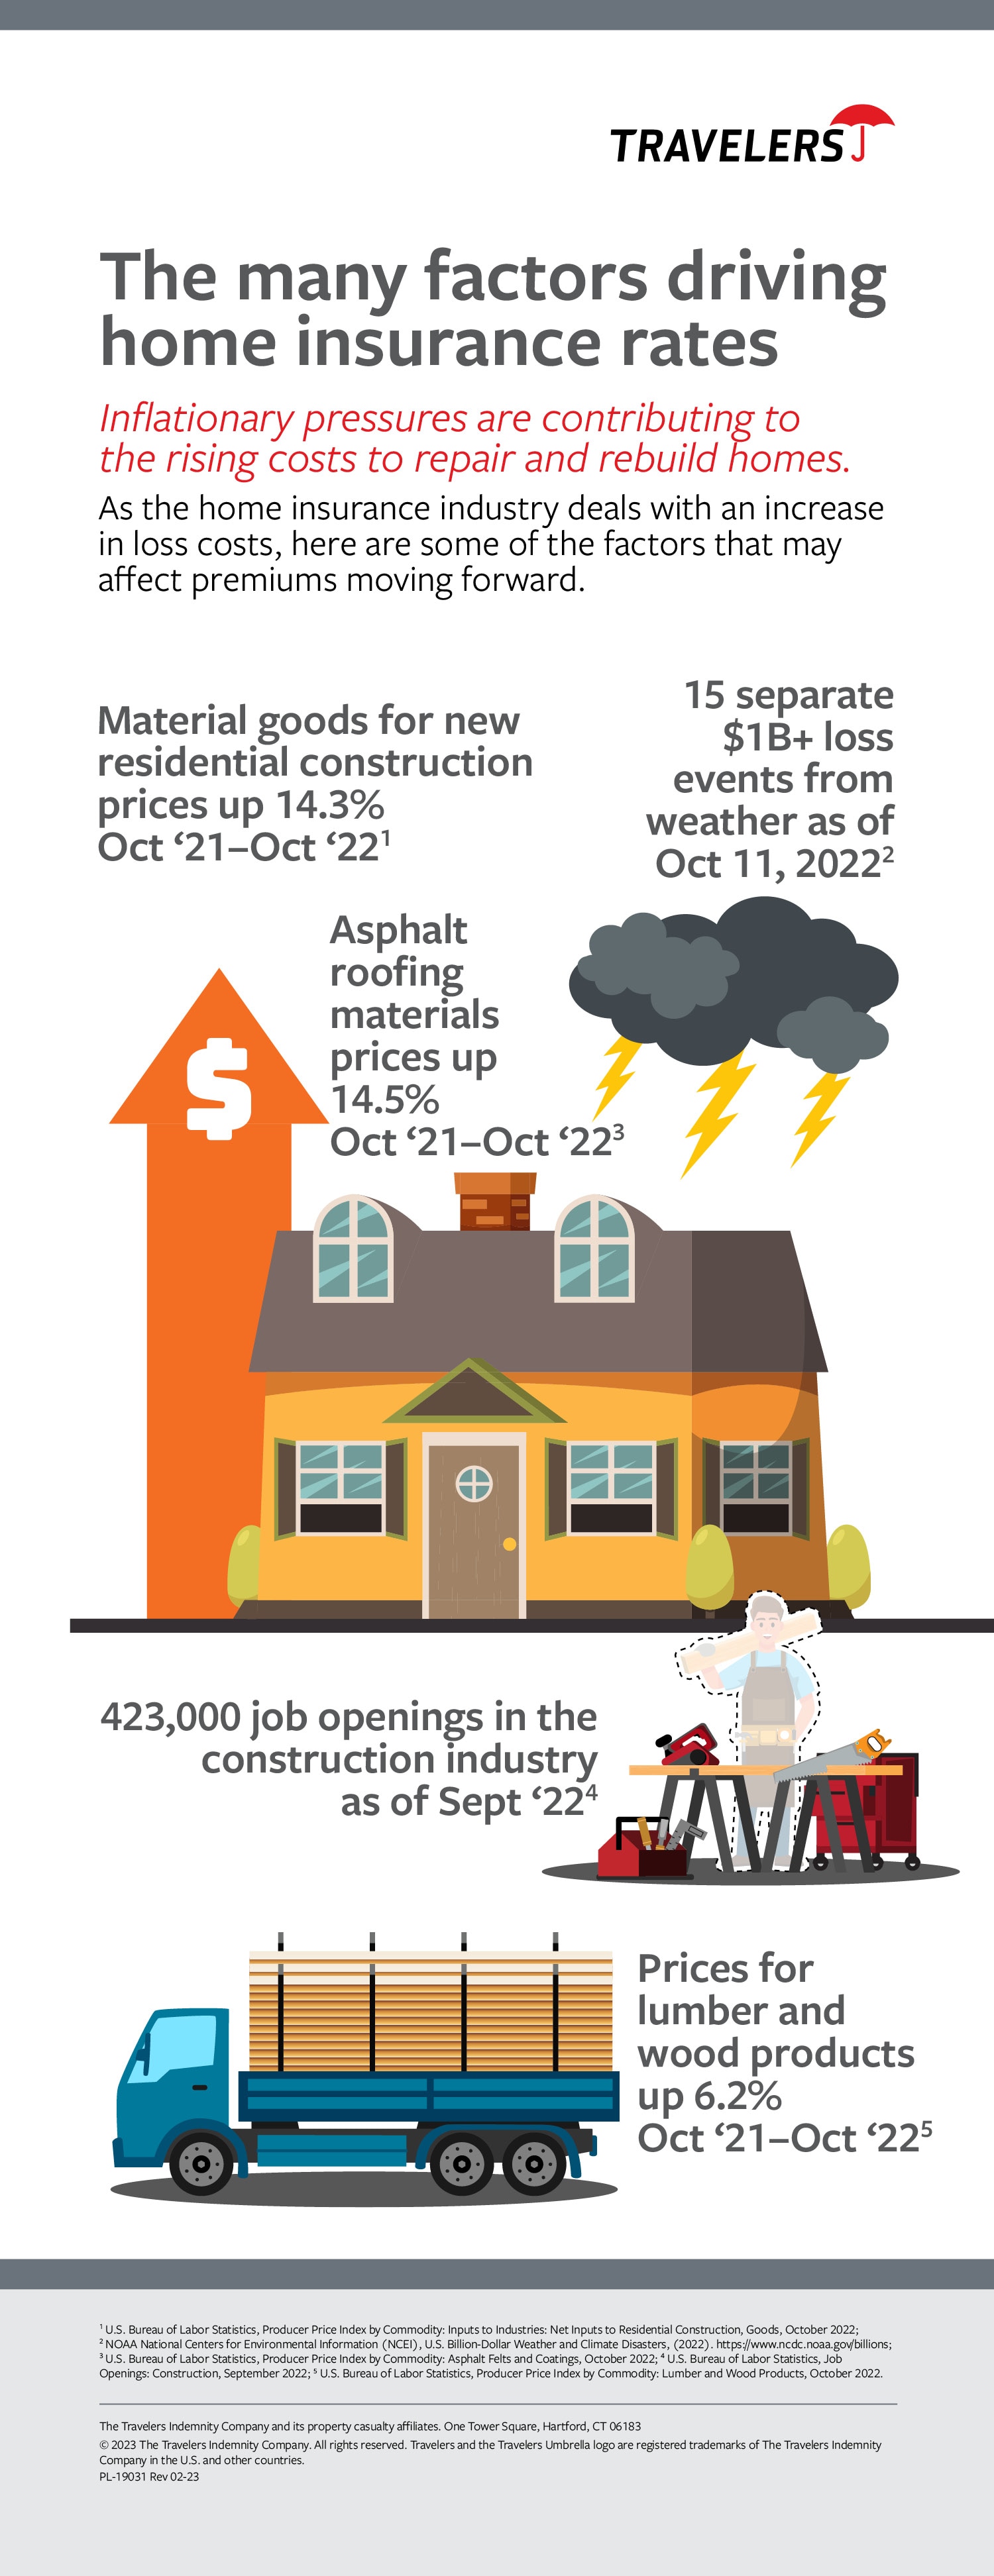 Personal Insurance Home Severity Trends Infographic